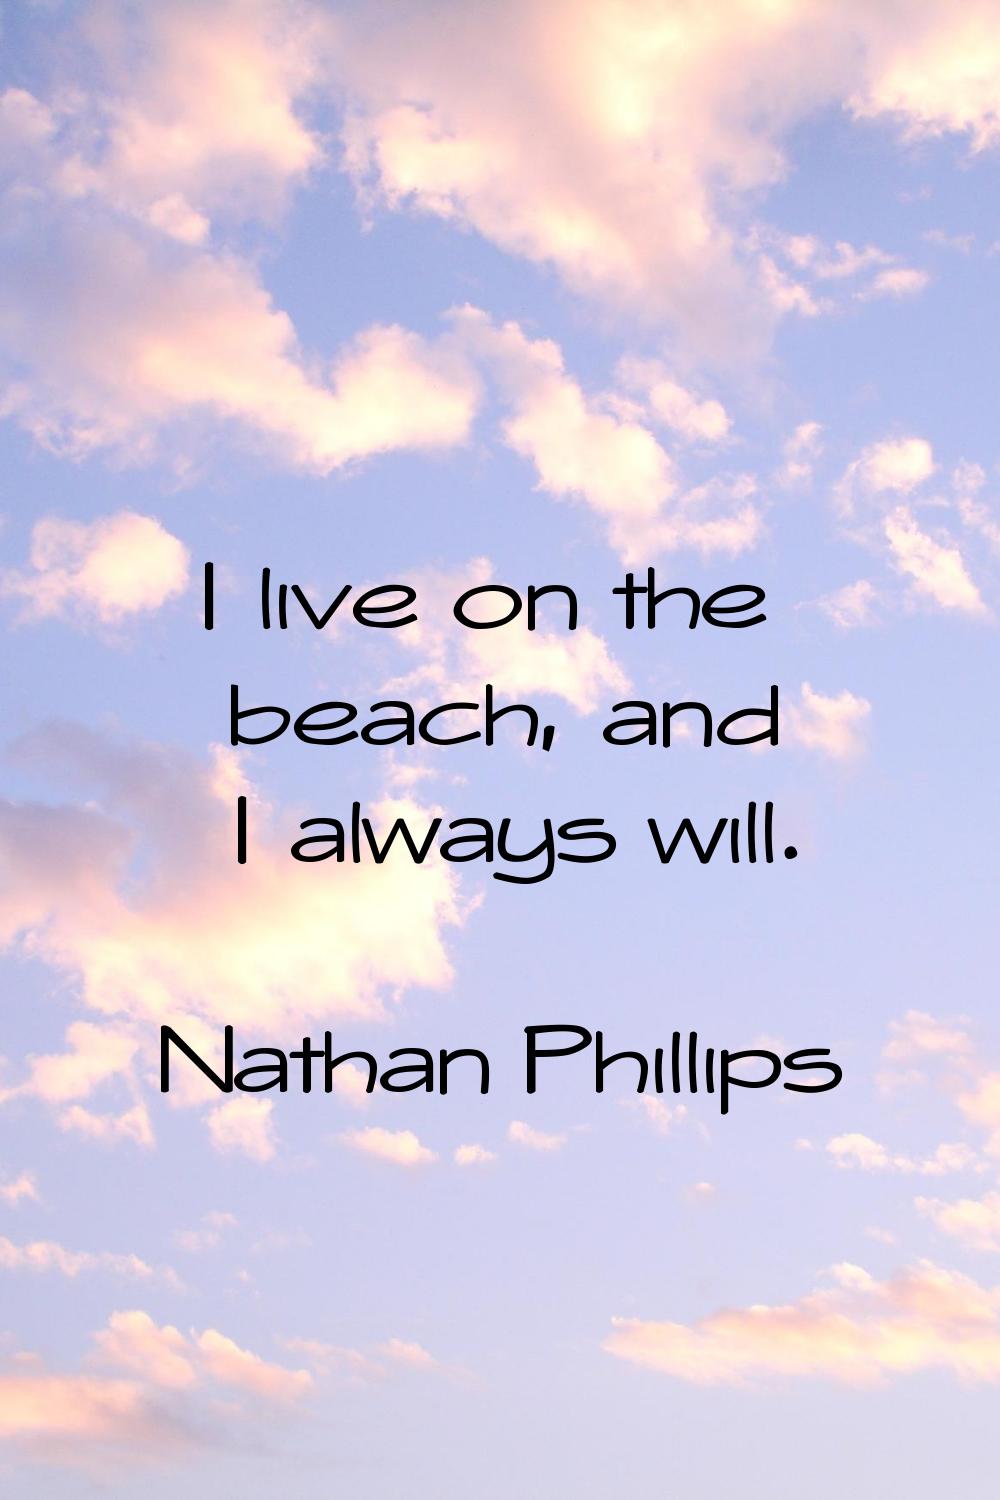 I live on the beach, and I always will.